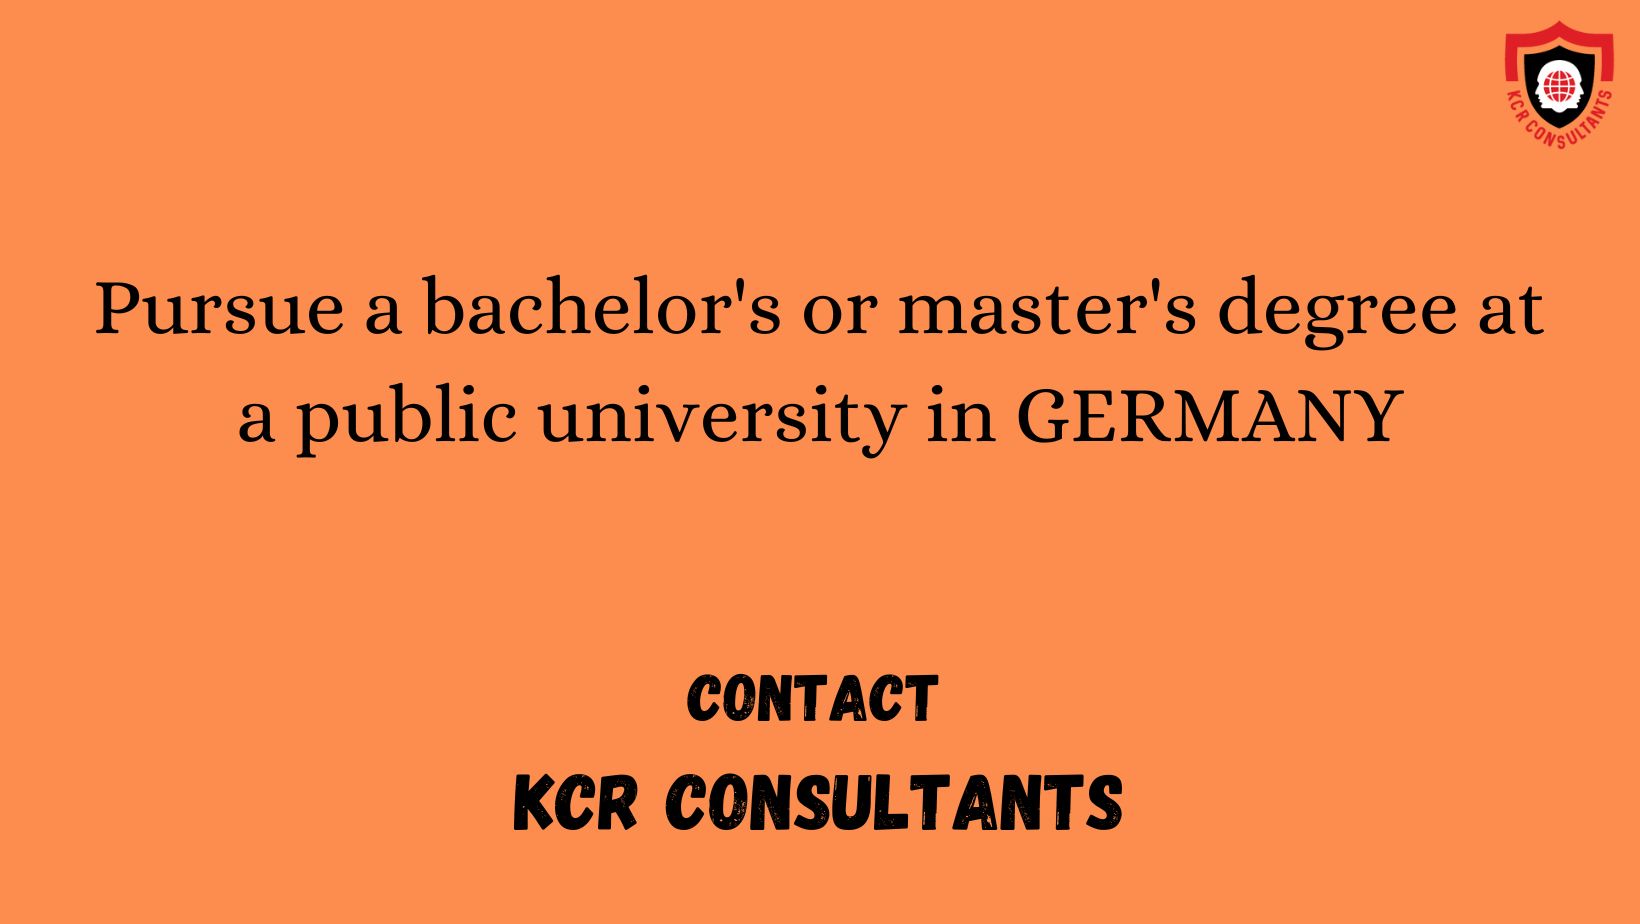 BRANDENBURG UNIVERSITY OF APPLIED SCIENCES (THB) - KCR CONSULTANTS - Contact us